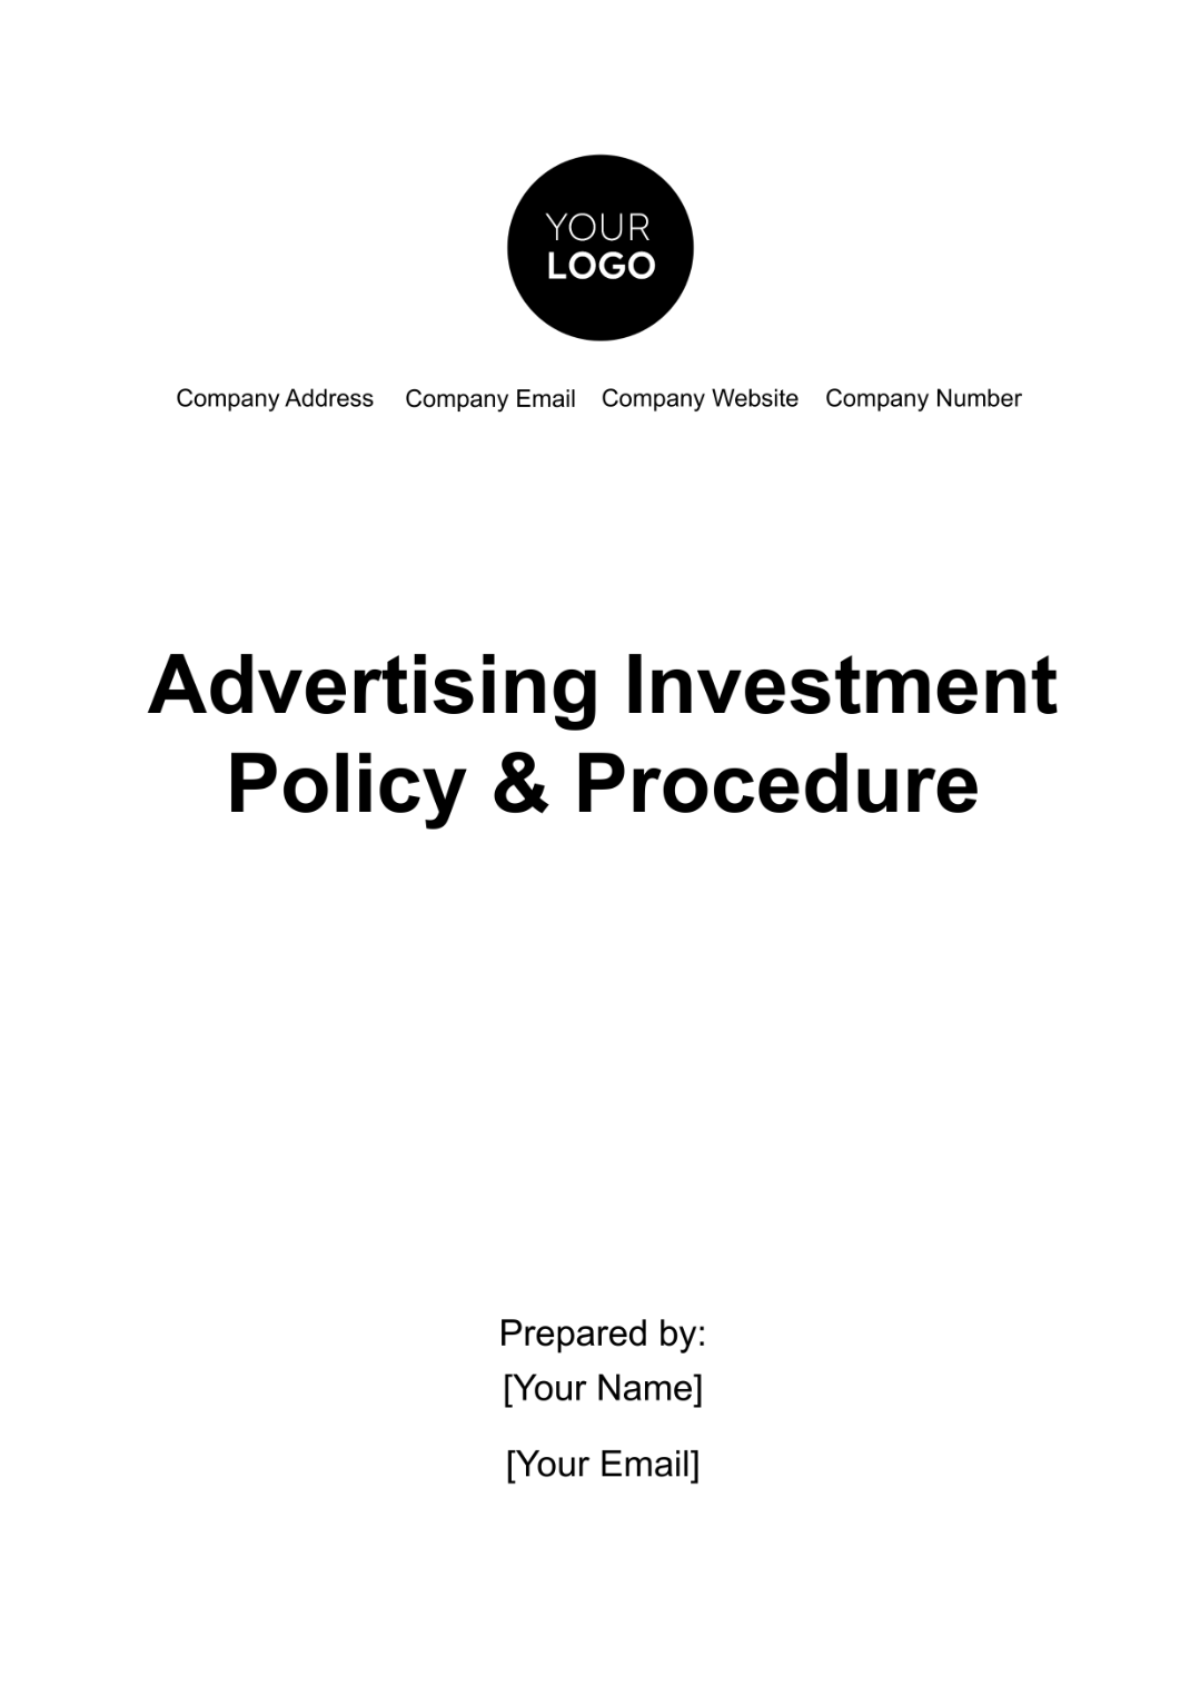 Advertising Investment Policy & Procedure Template